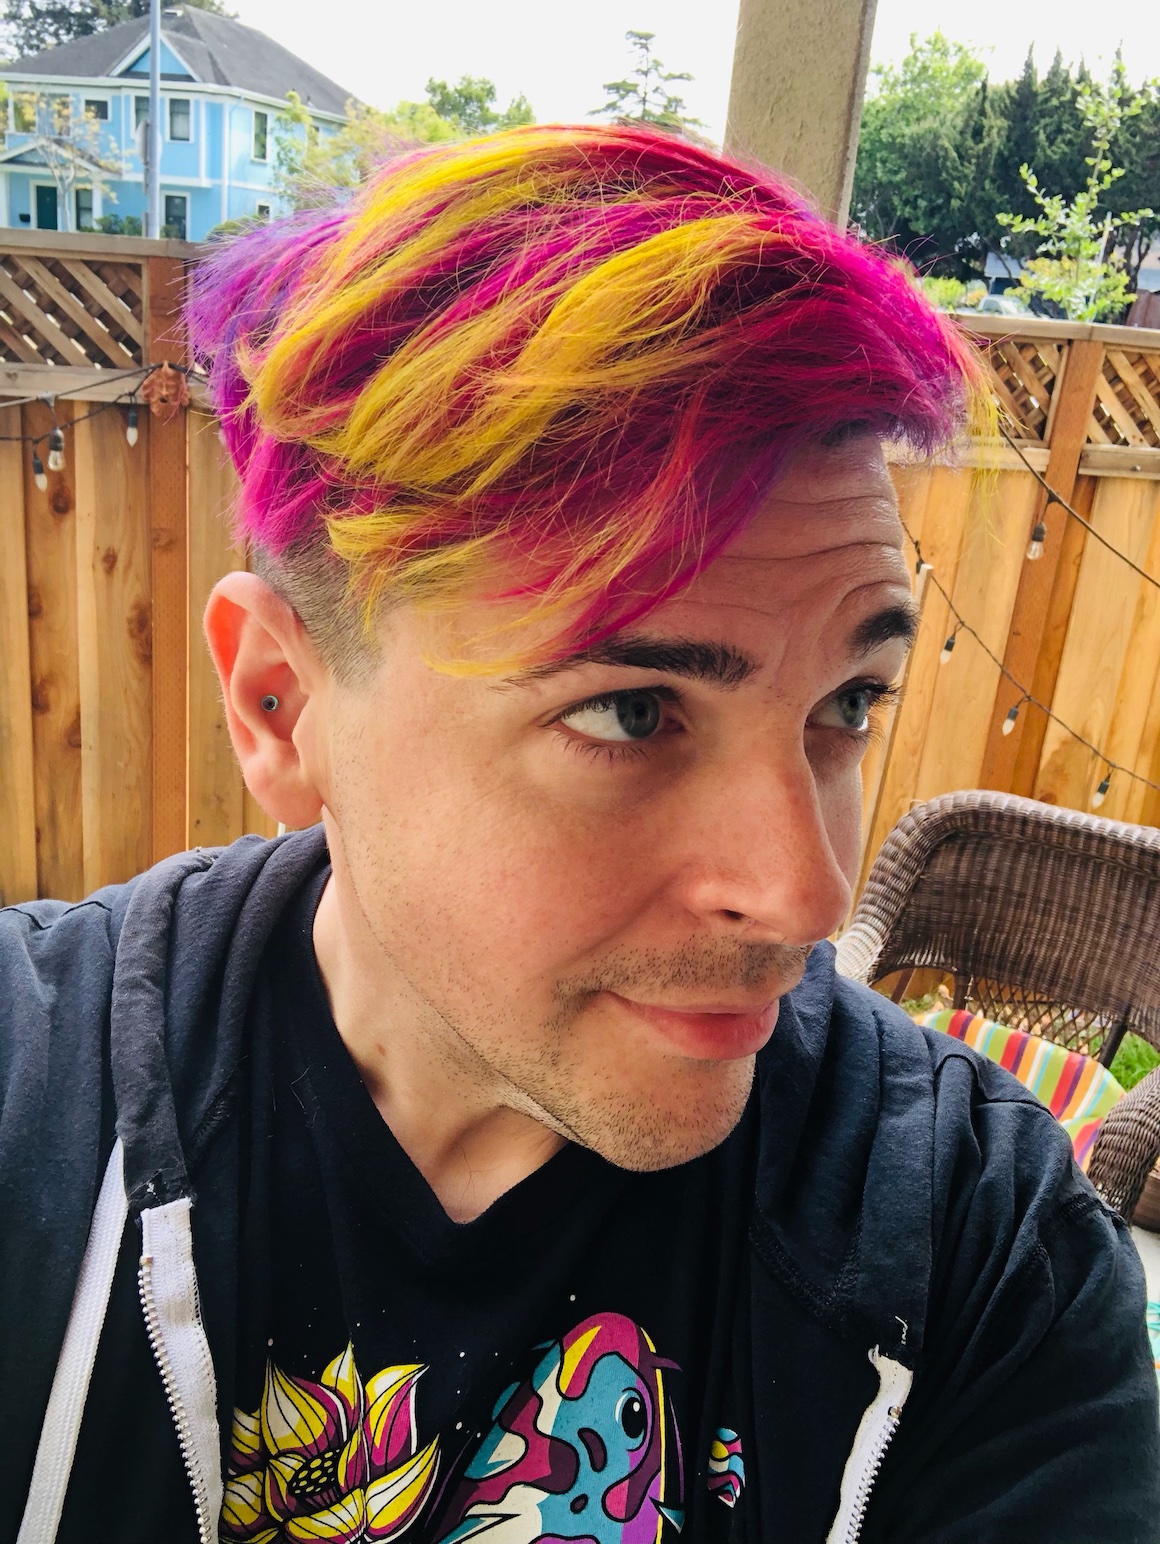 Photograph of Kevin Swiber at sunset with colorful hair.